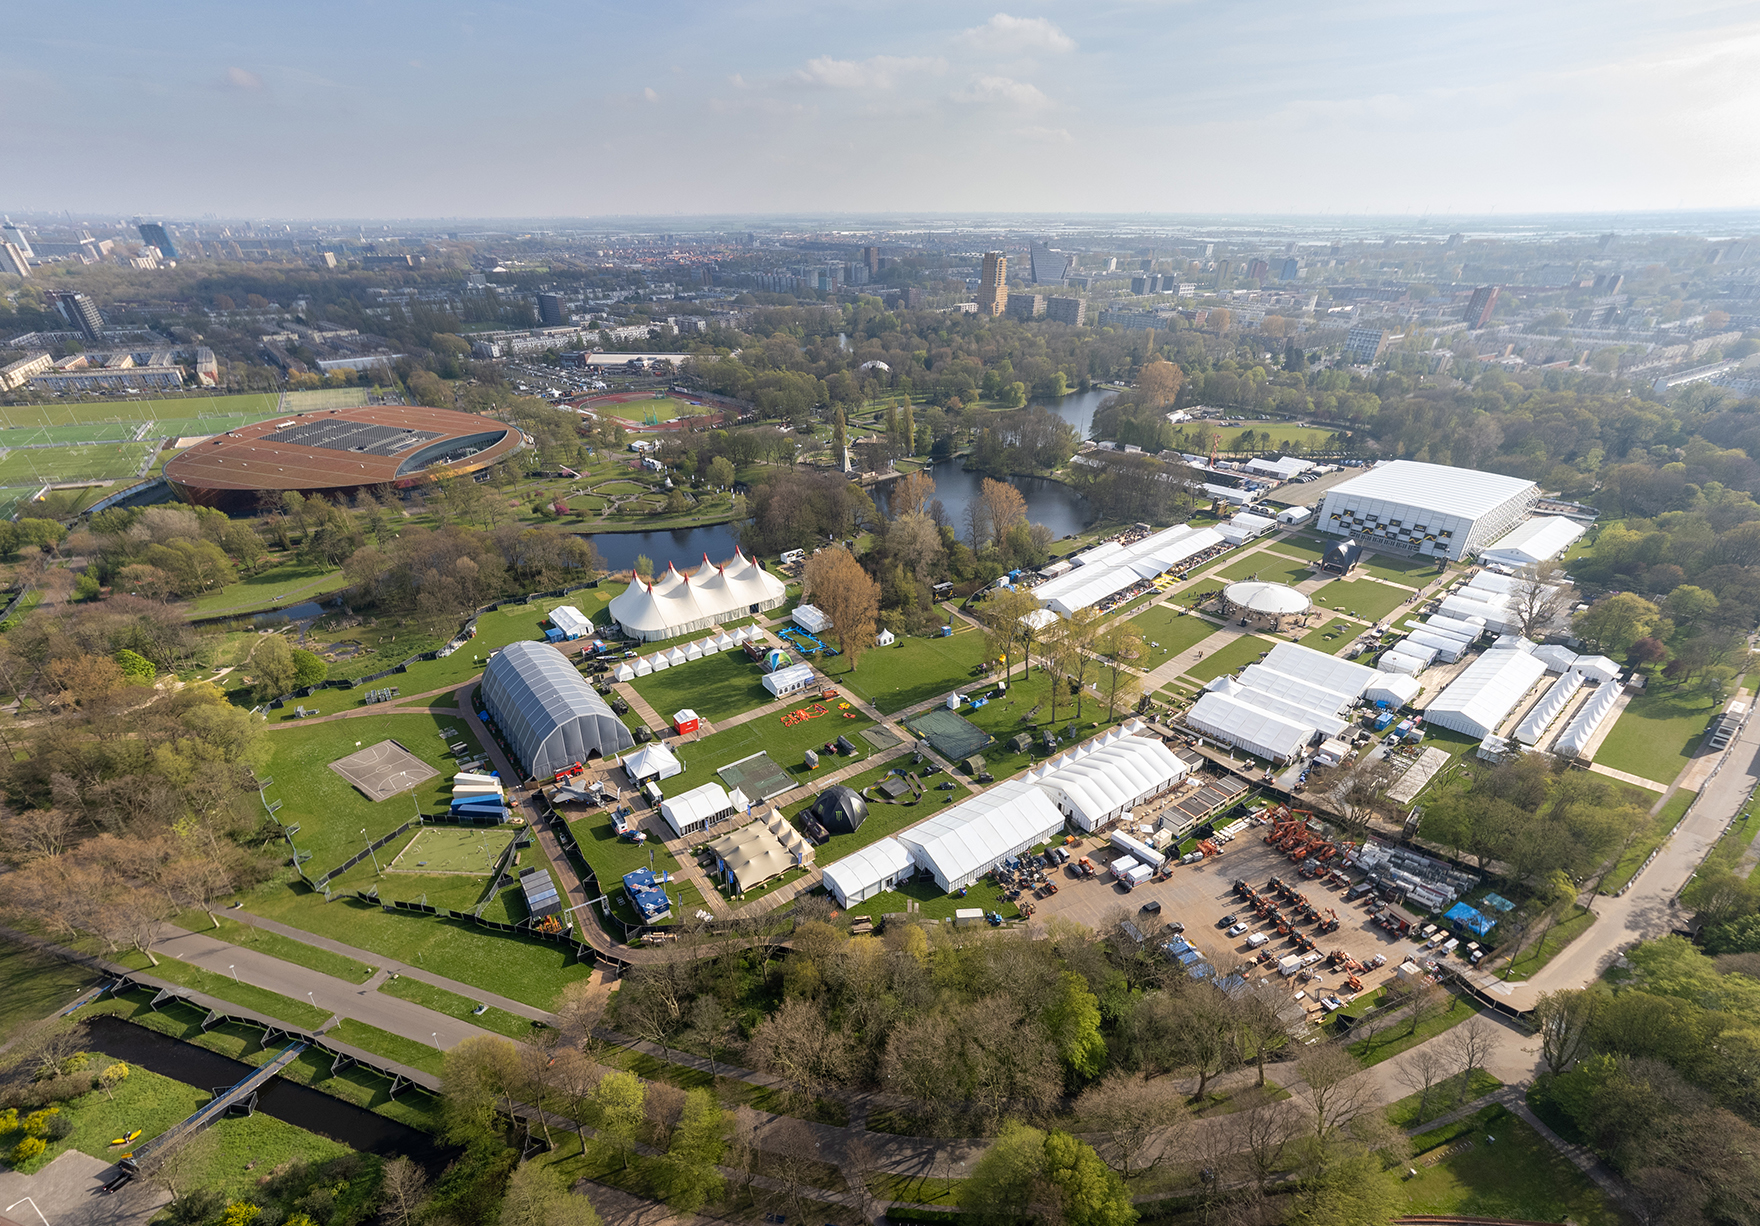 Sportcampus Zuiderpark Hosts Invictus Games Aerial View Faulknerbrowns Architects Lh